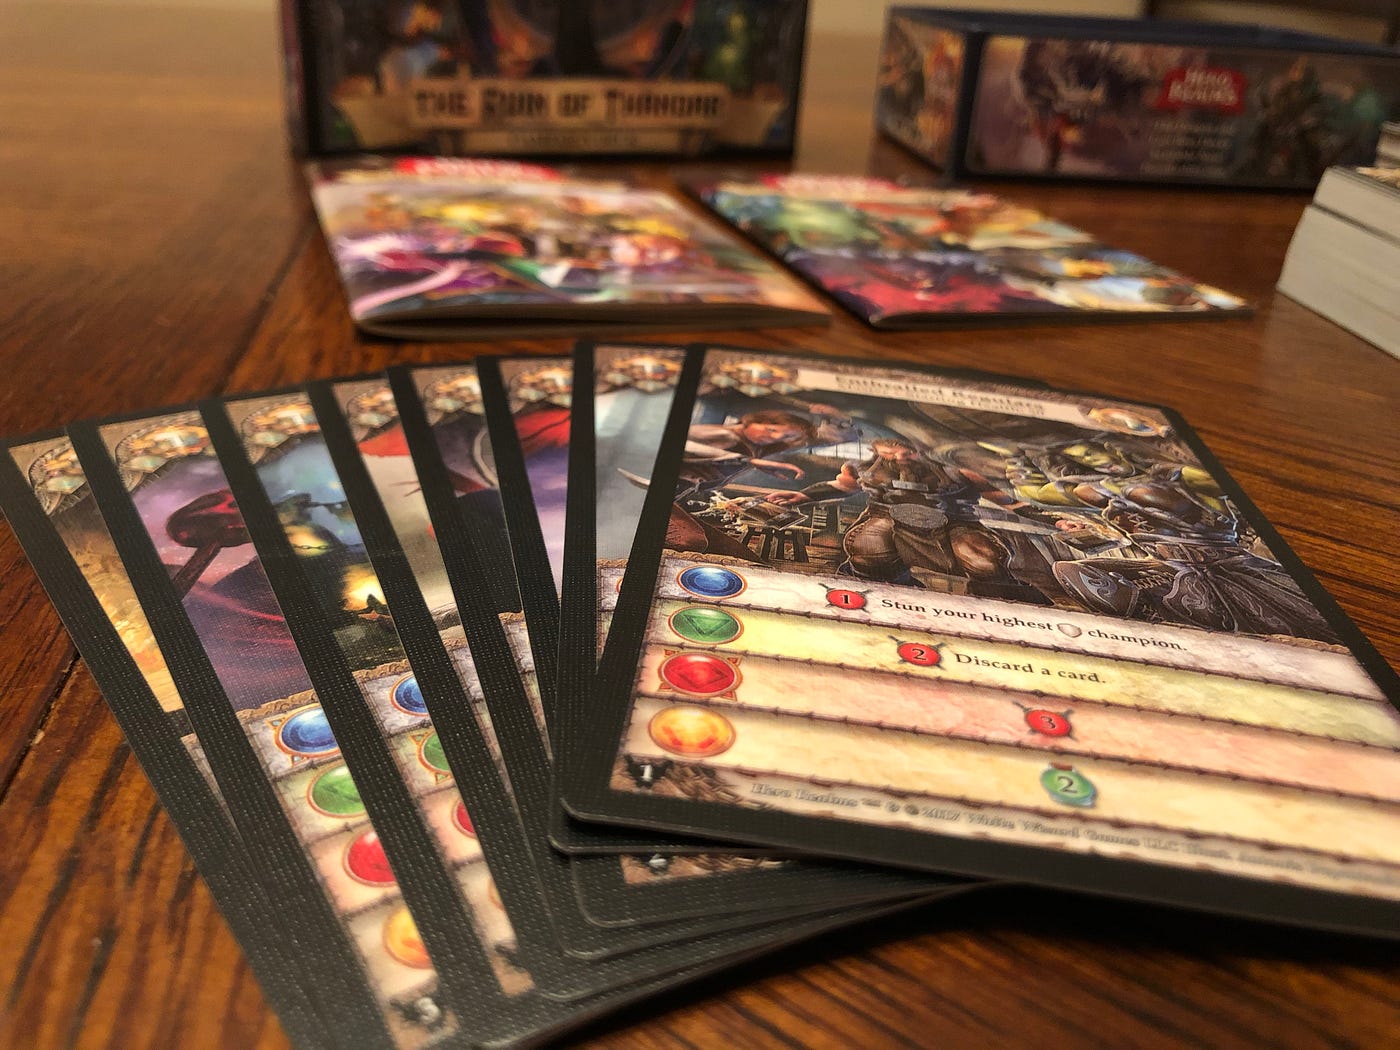 Hero Realms: The Ruin of Thandar Review - Board Games